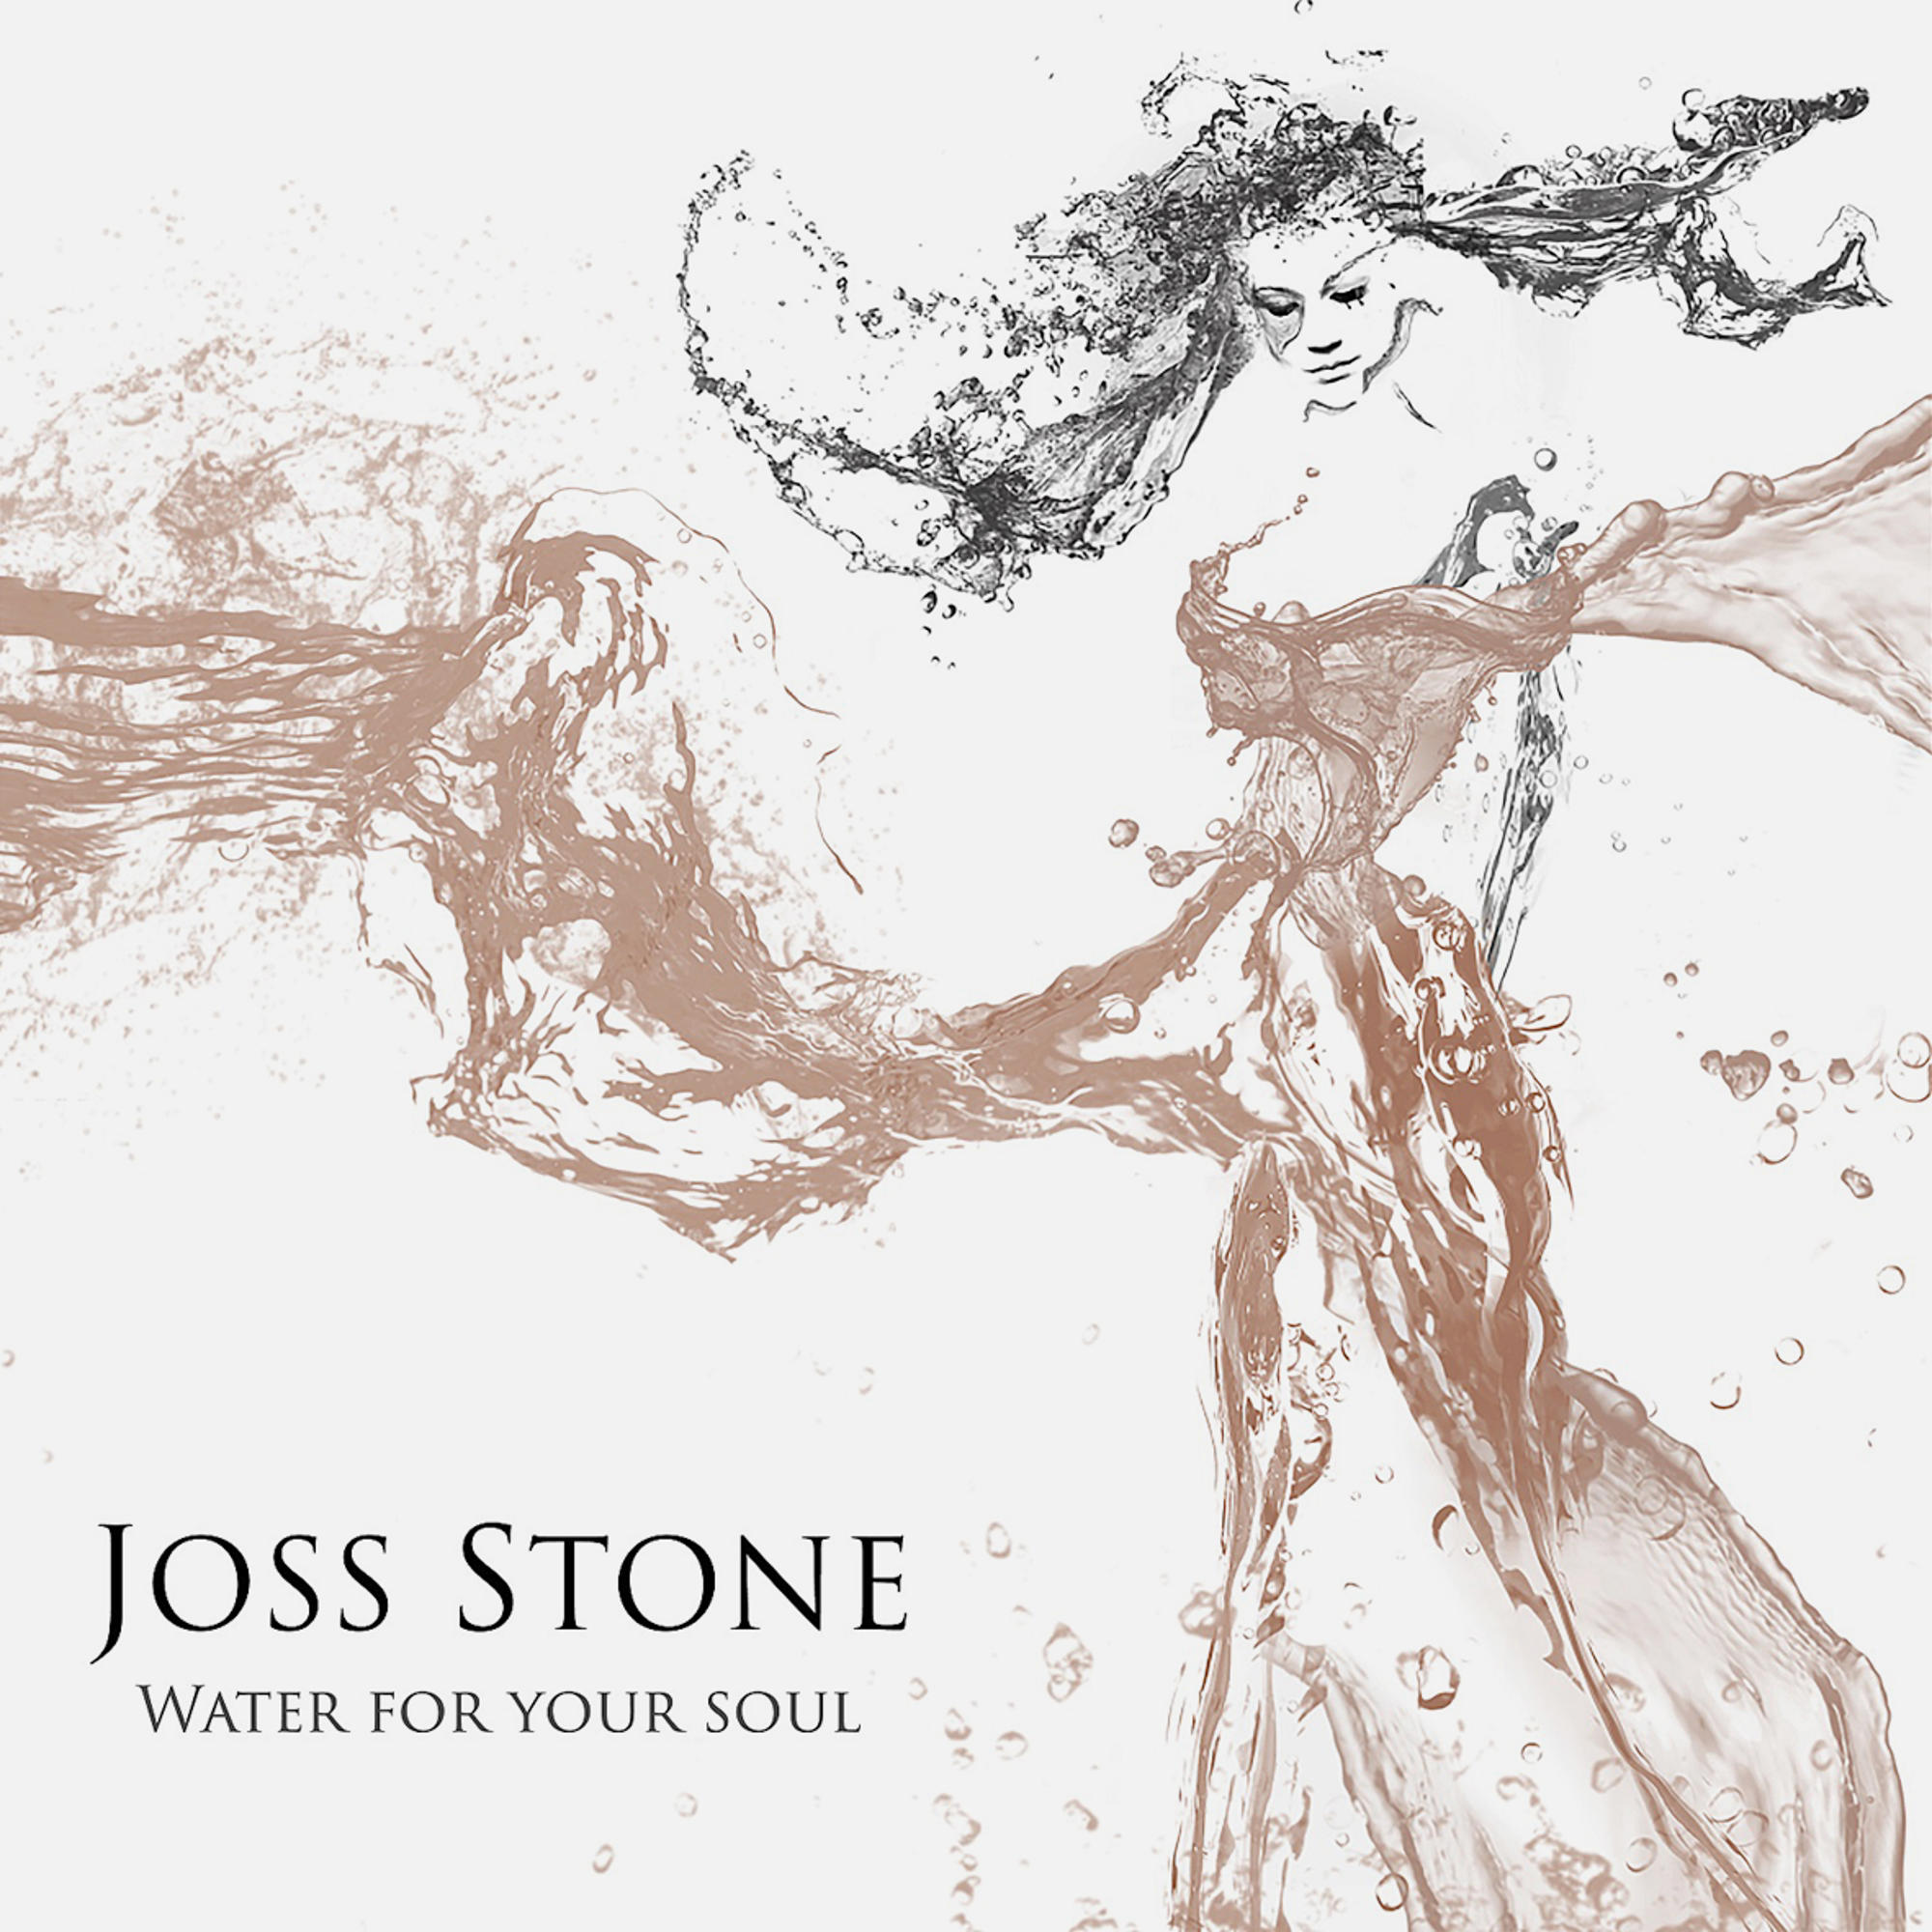 - (CD) Stone - for Your Joss Soul Water